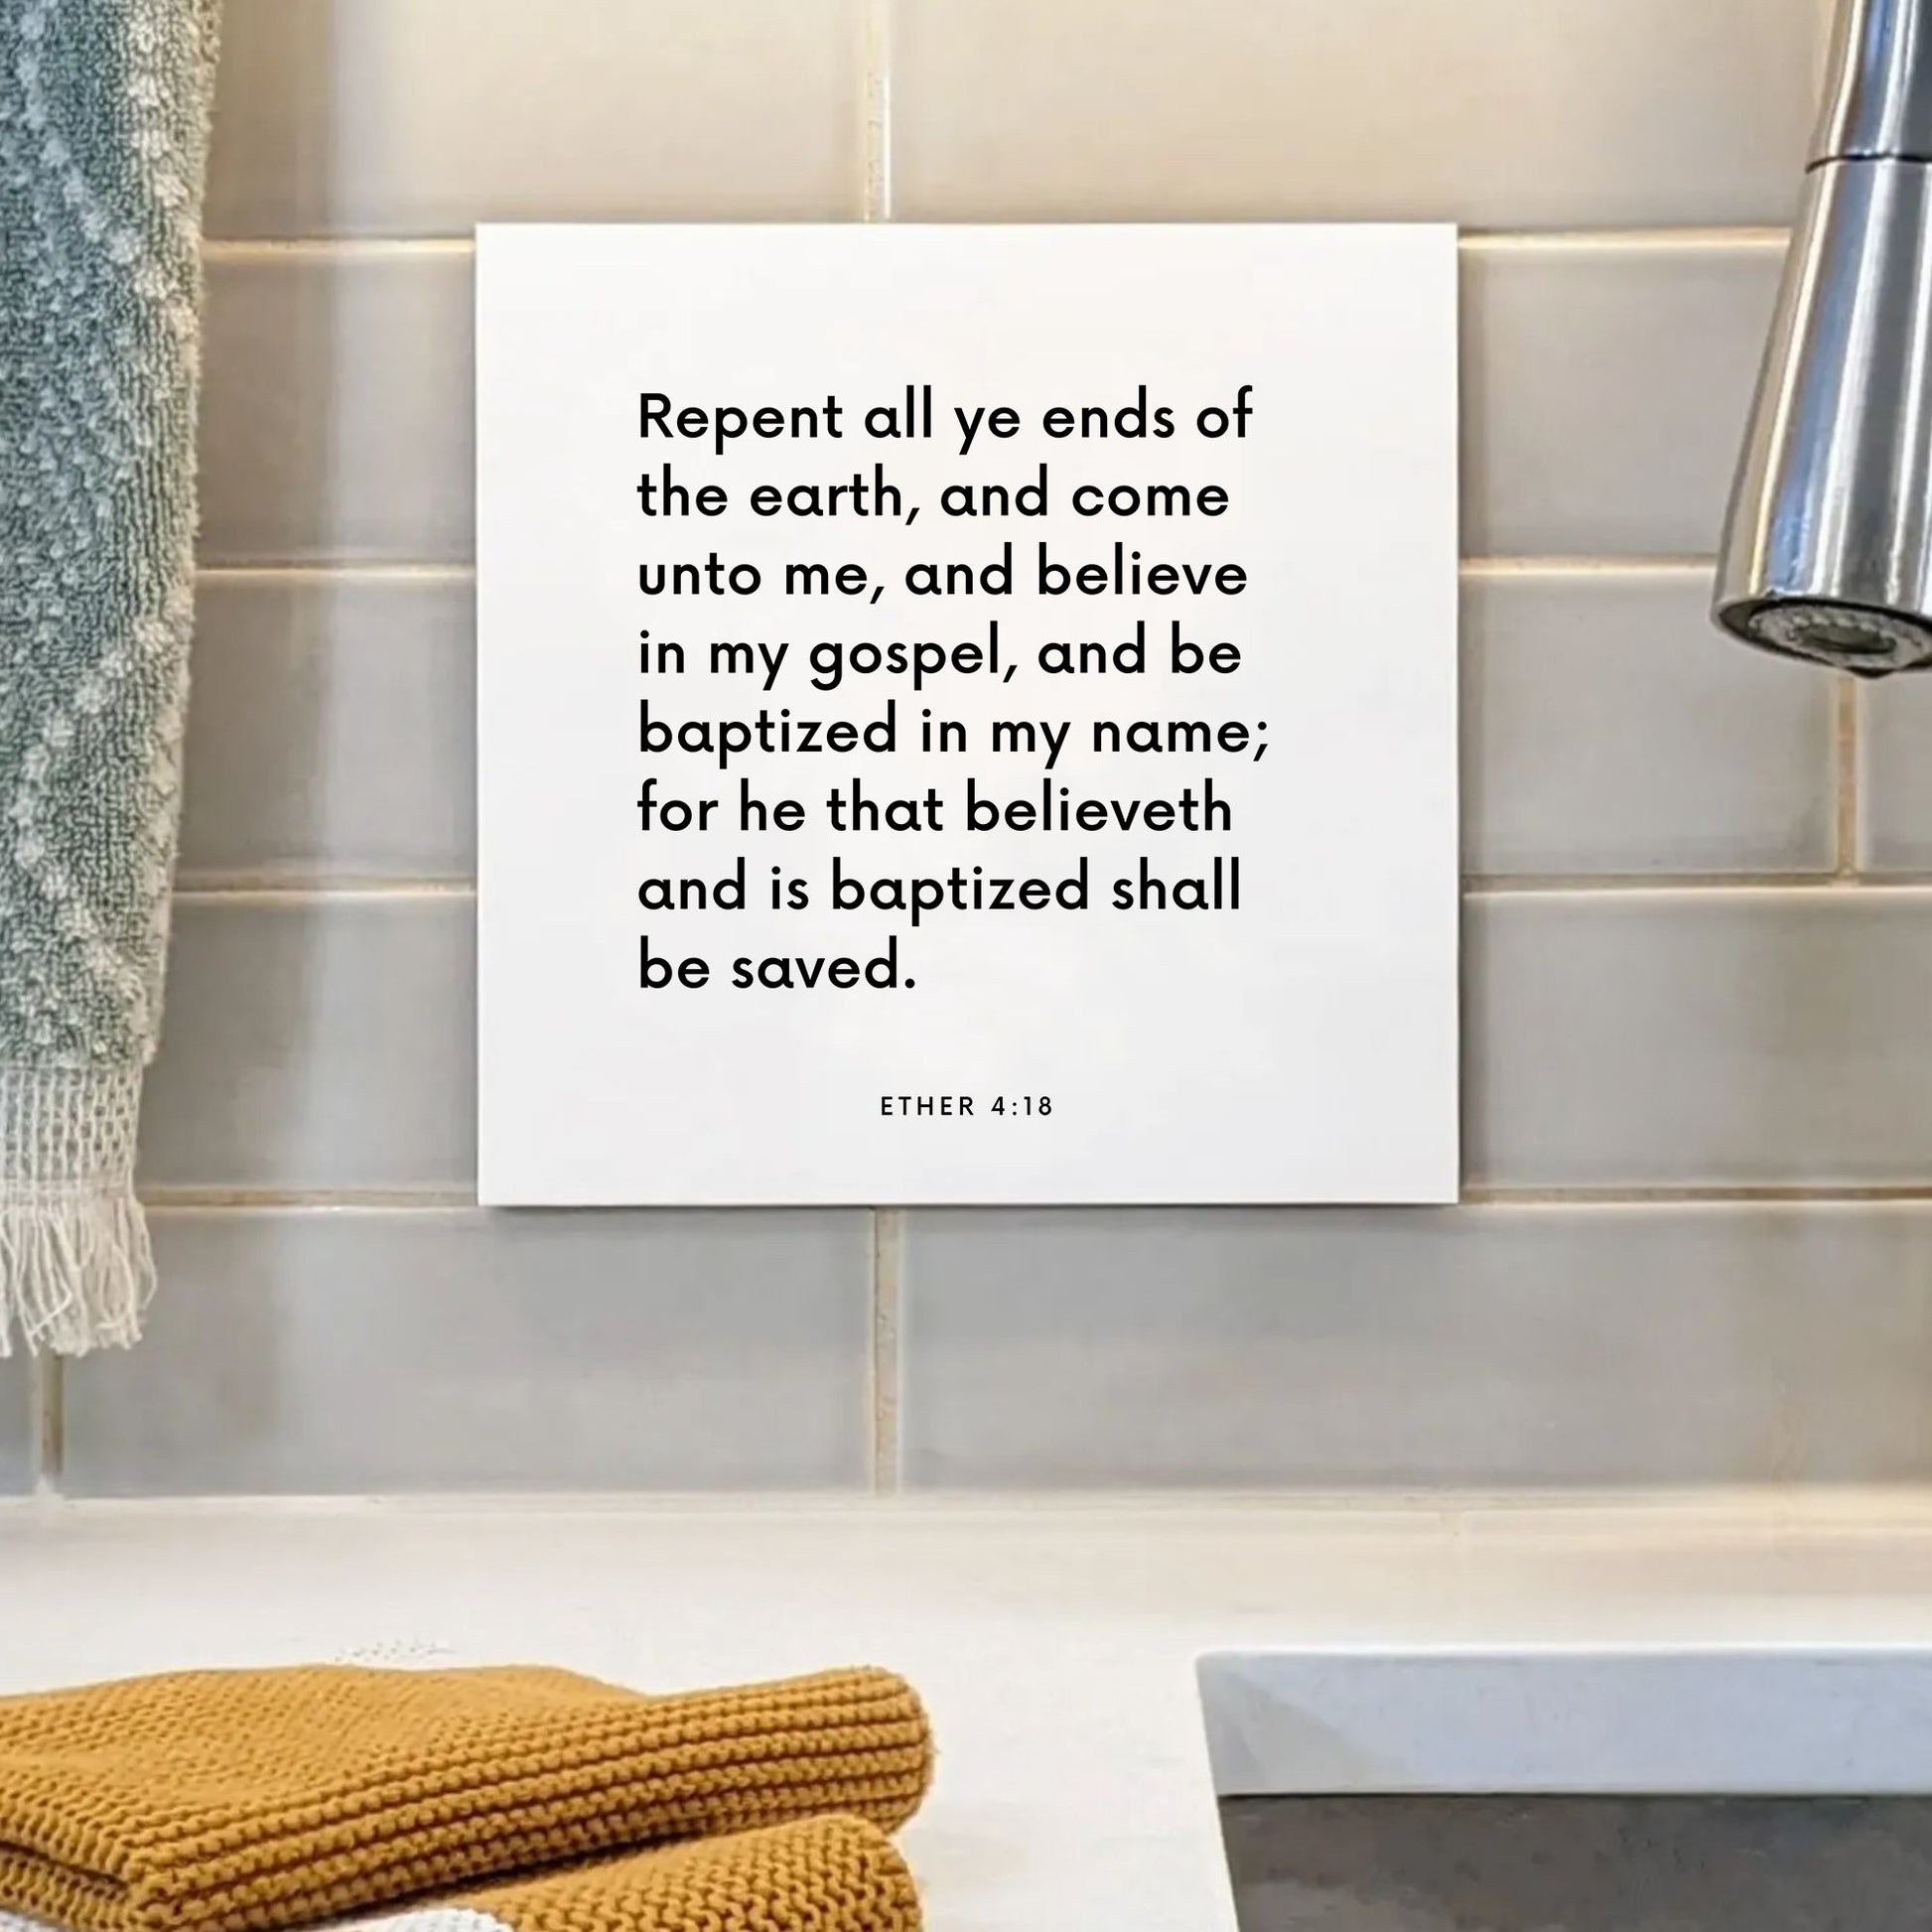 Sink mouting of the scripture tile for Ether 4:18 - "Repent all ye ends of the earth"